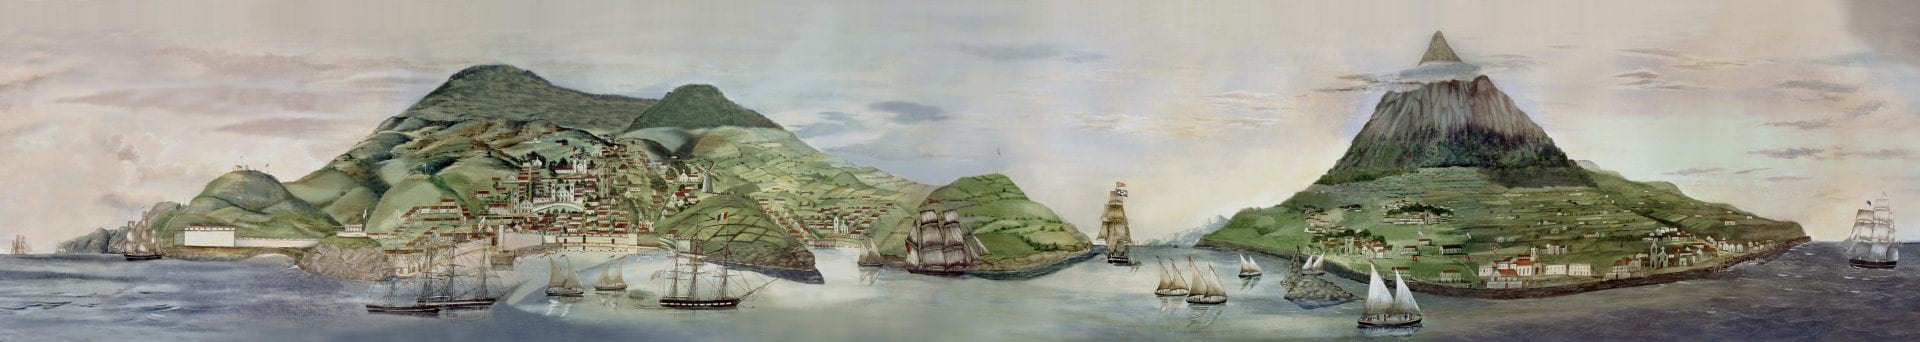 Scene of the Azores from the Grand Panorama of a Whaling Voyage 'Round the World